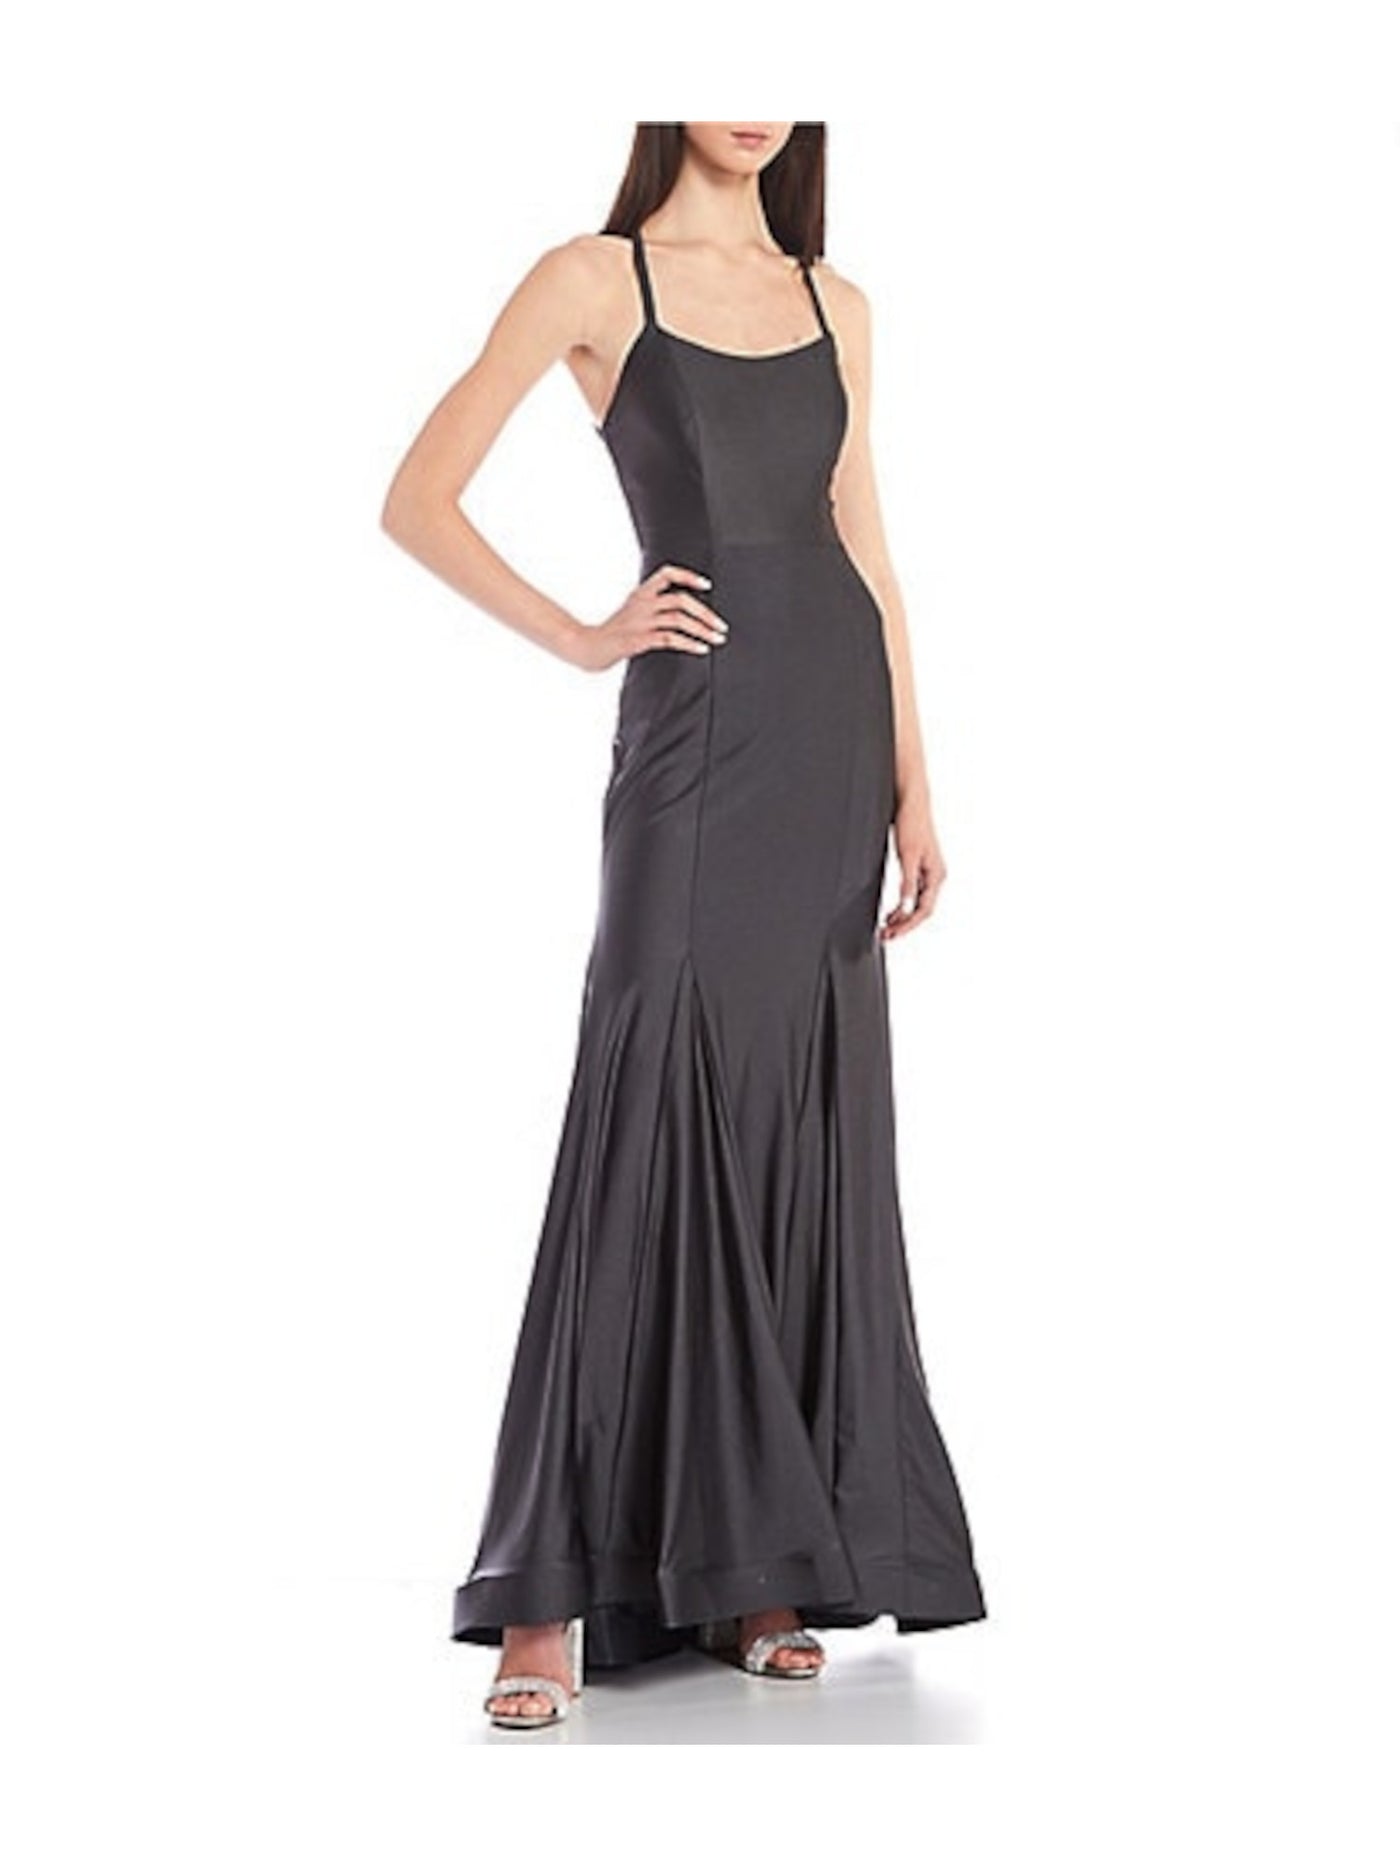 BLONDIE Womens Gray Stretch Zippered Illusion Panel Cutout Back Lined Sleeveless Scoop Neck Full-Length Formal Gown Dress Juniors 13